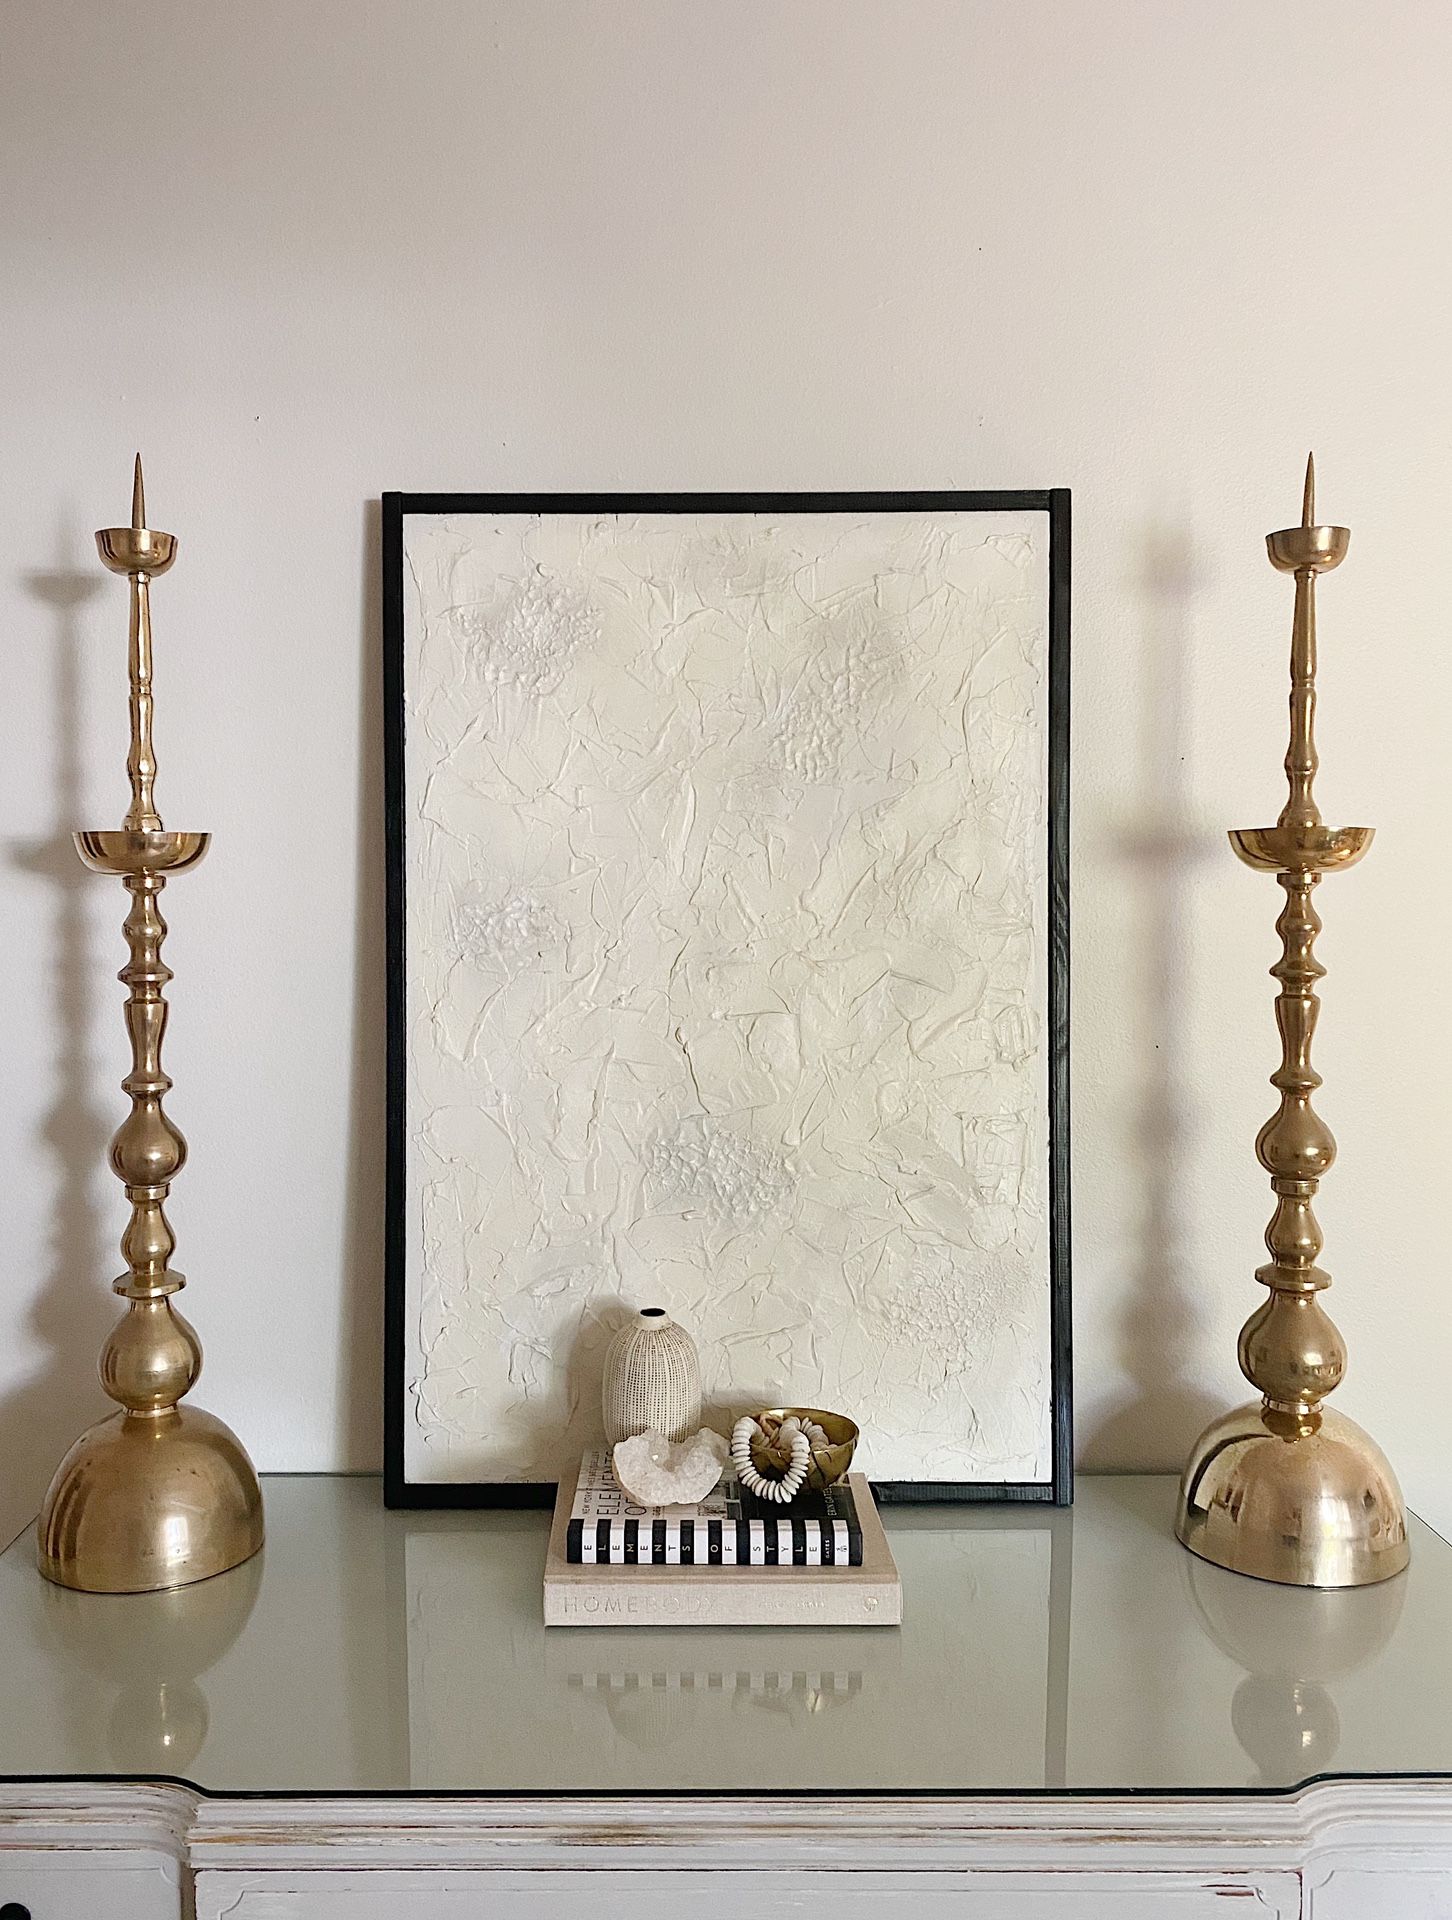 2 Tall Brass Candle Holders